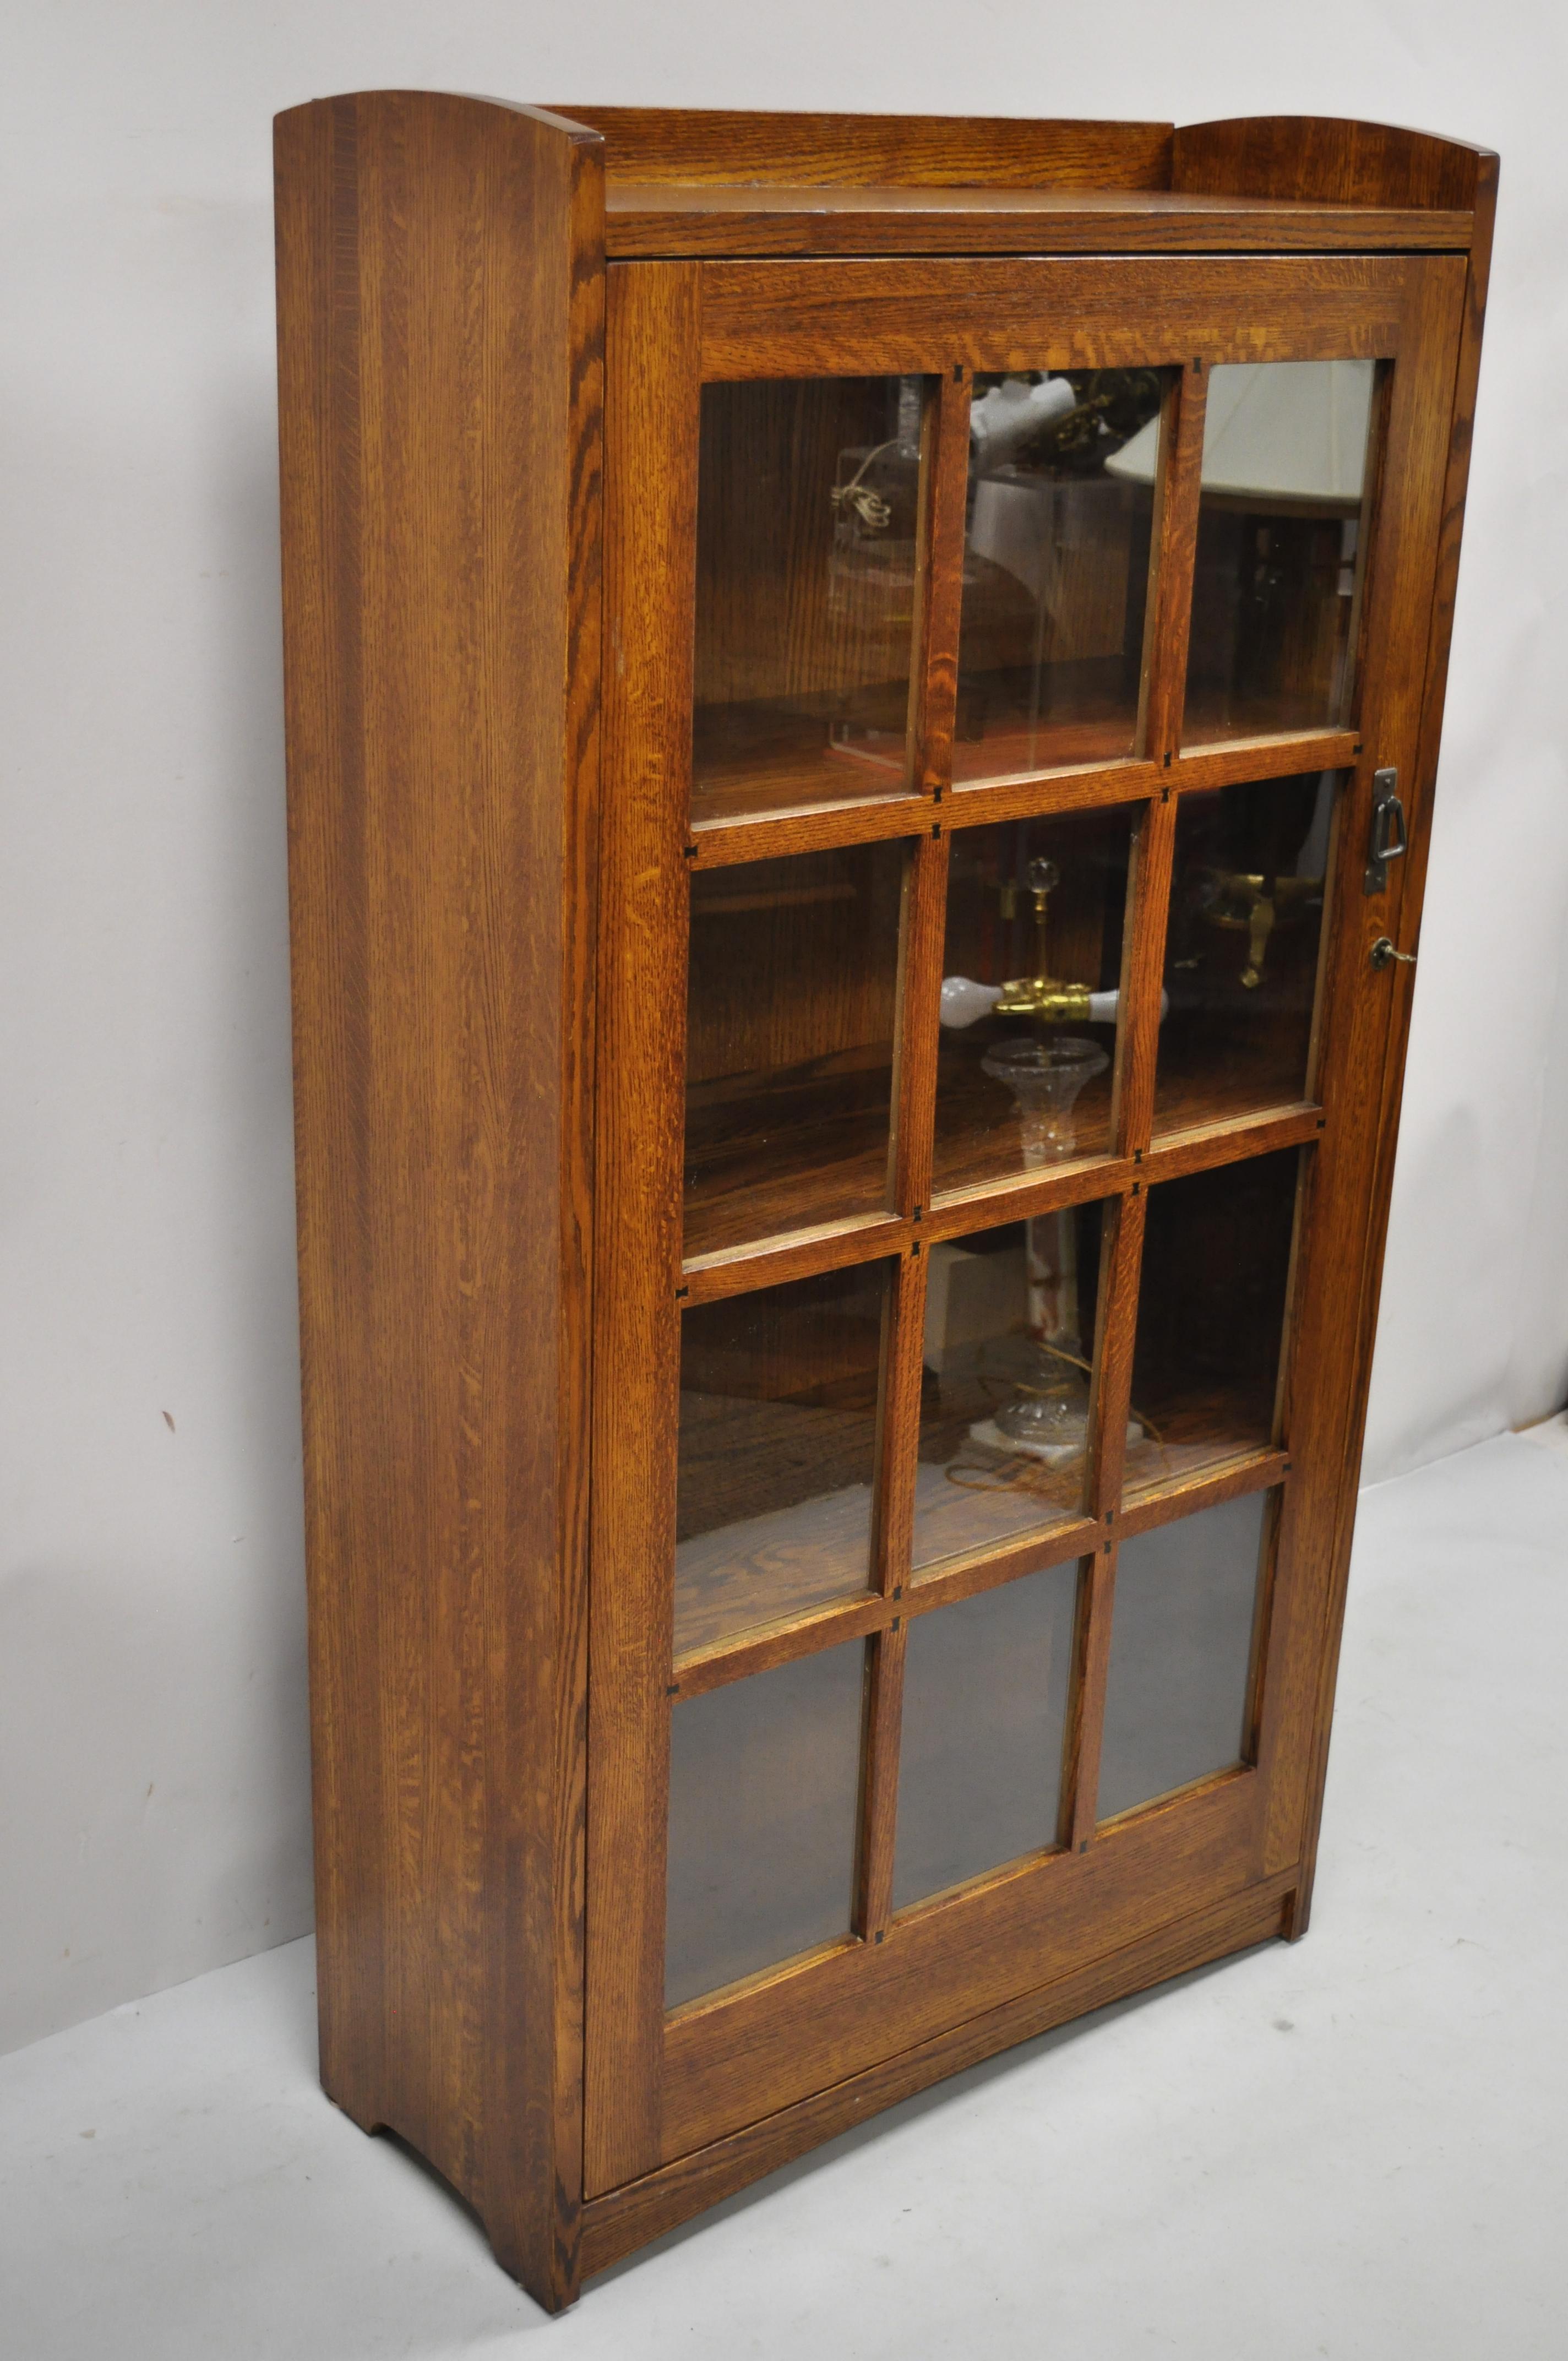 Mission oak style Arts & Crafts one door oak wood china cabinet curio bookcase. Item features solid wood construction, beautiful wood grain, 1 glass swing doors, working lock and key, 3 wooden shelves, quality craftsmanship, great style and form.